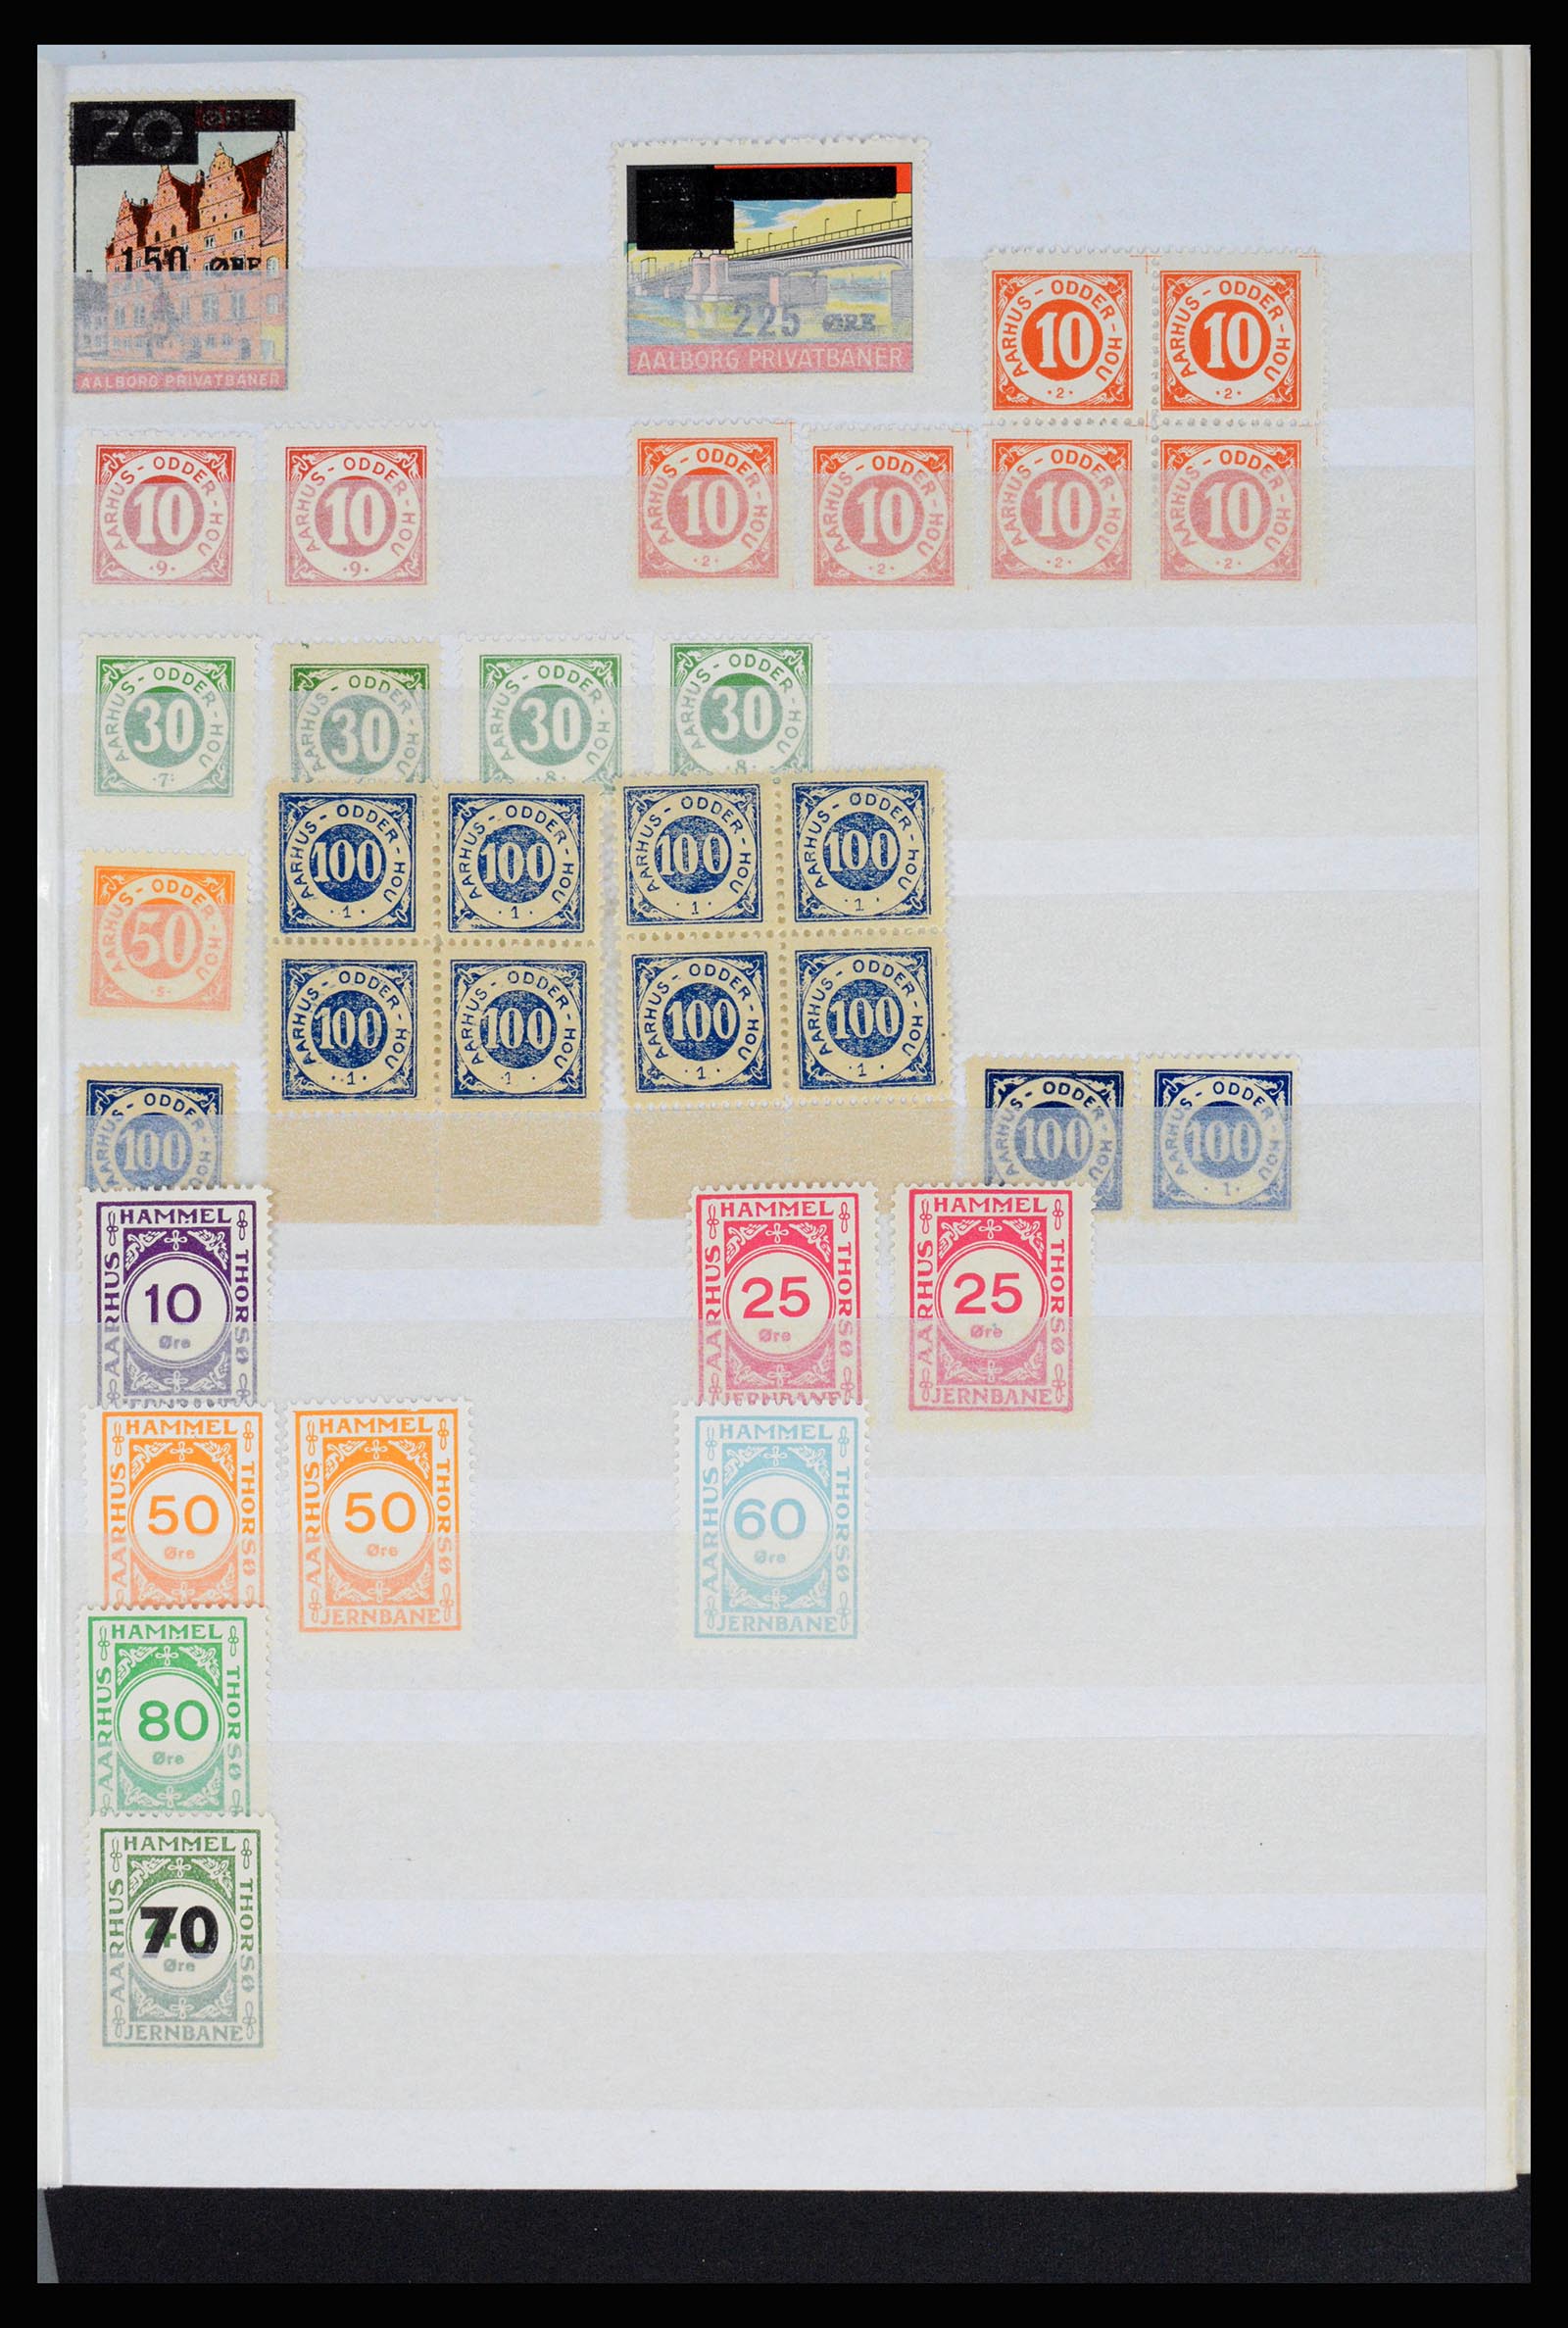 36982 015 - Stamp collection 36982 Denmark railroad stamps.